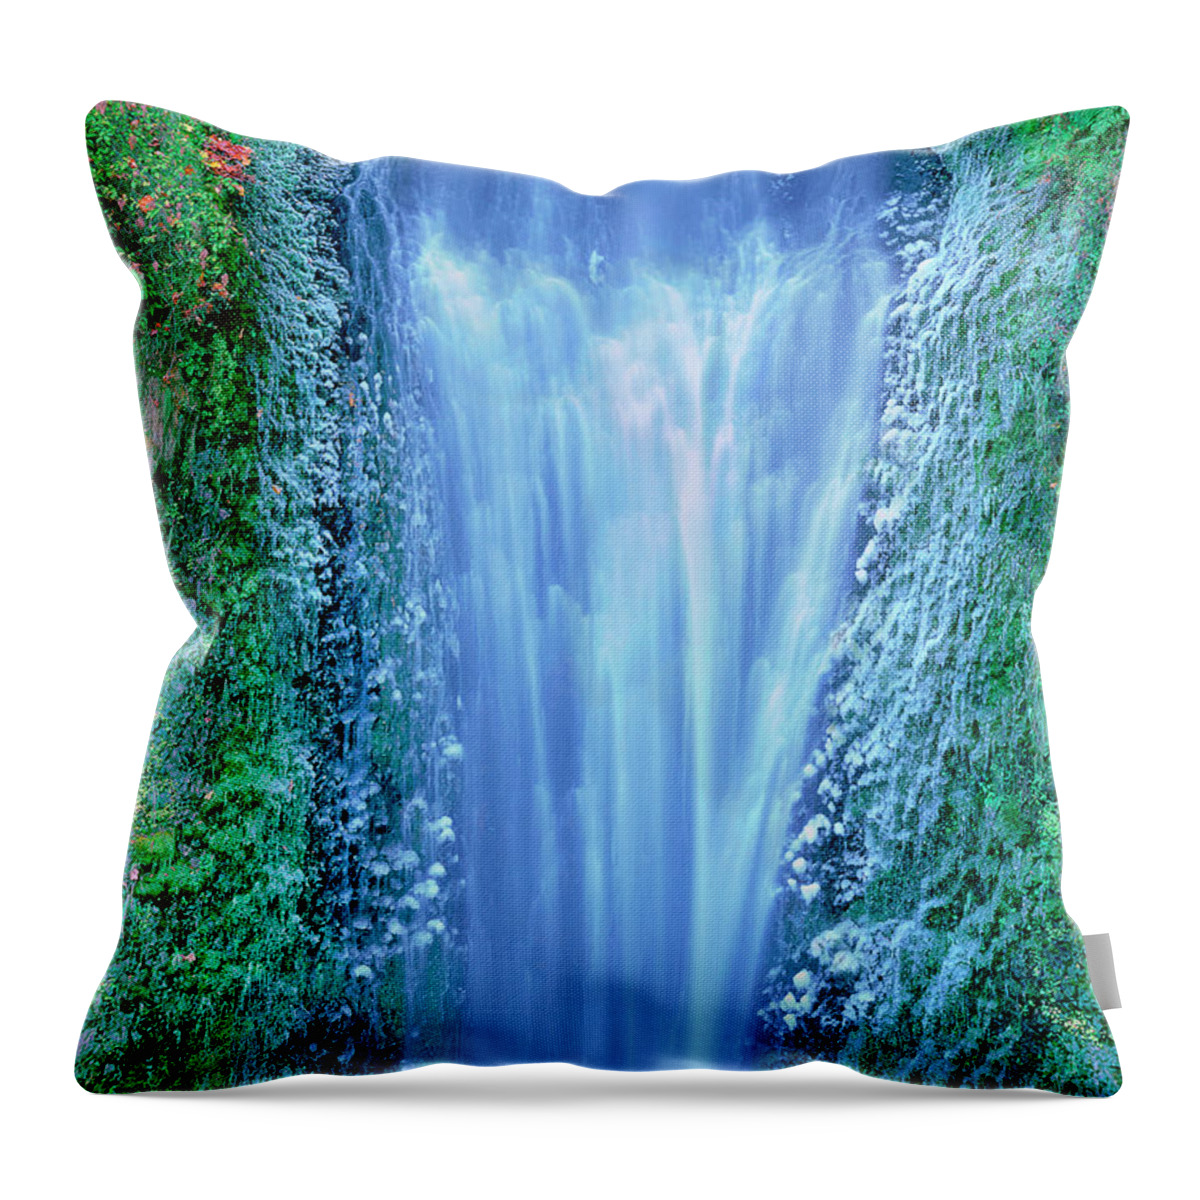 North America Throw Pillow featuring the photograph Multnomah Falls Columbia River Gorge Oregon by Dave Welling